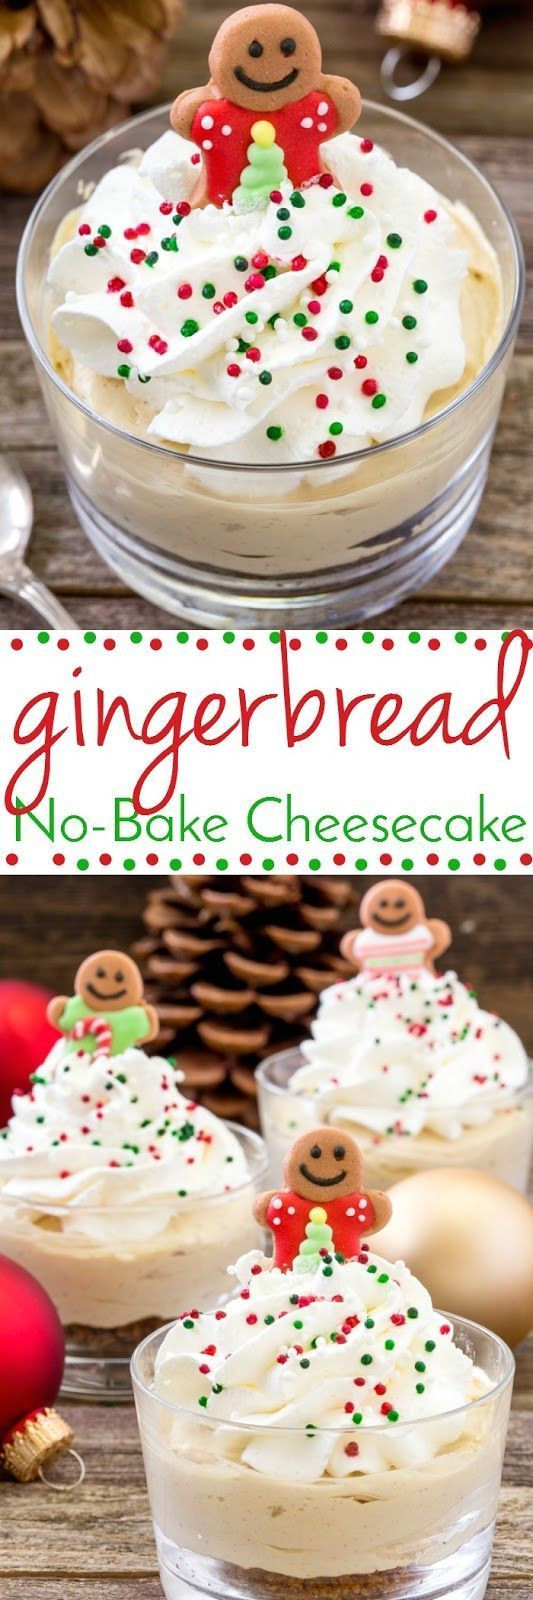 Christmas Desserts Pinterest
 17 Best images about Christmas Desserts on Pinterest